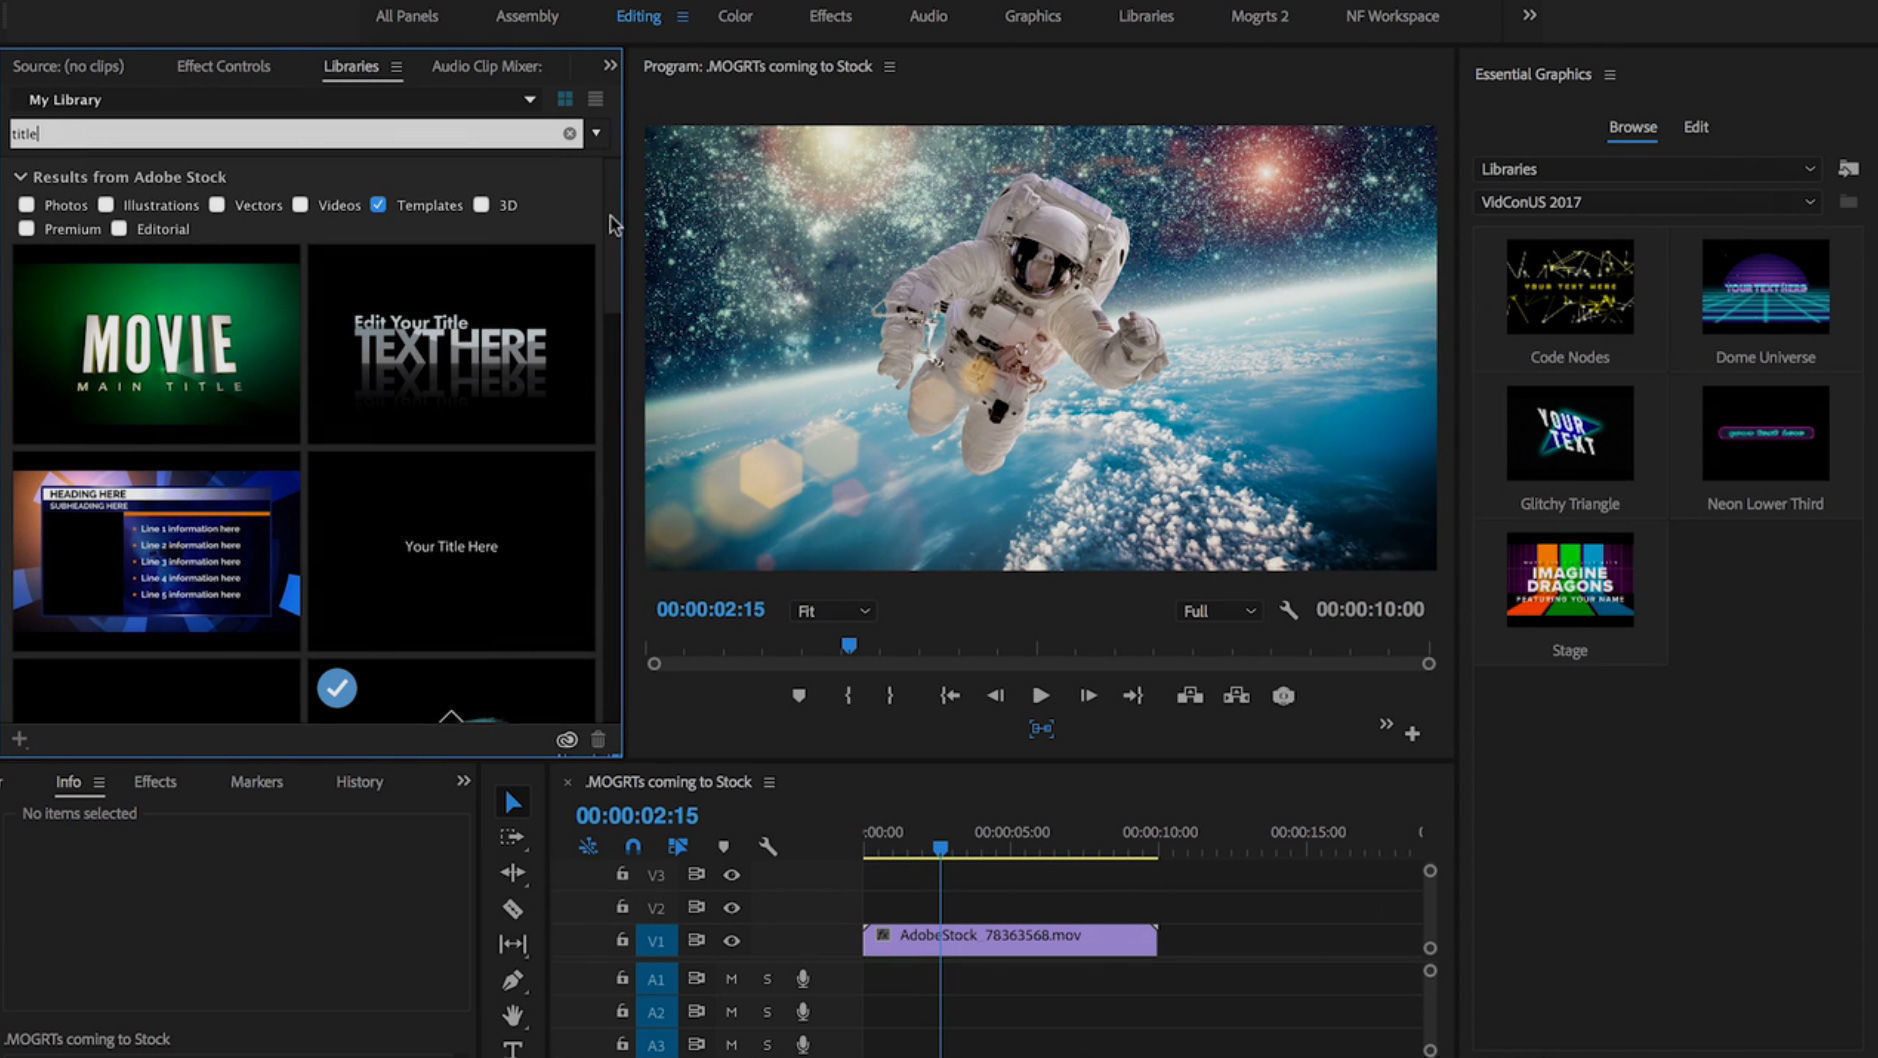 adobe after effects 7.0 professional for mac